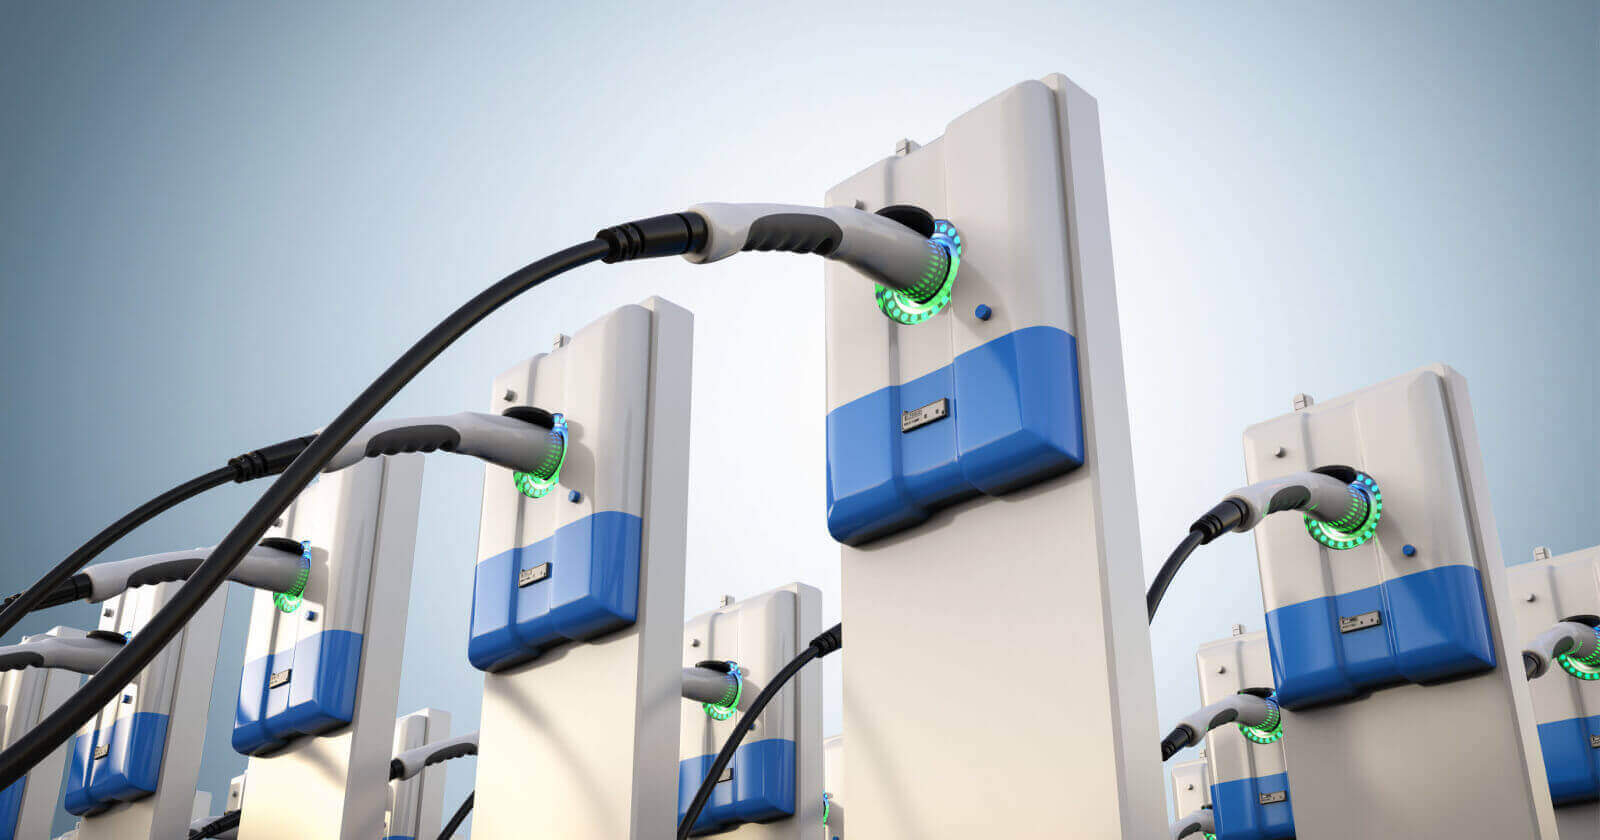 Electric Car Vehicle Charging Station Transformer